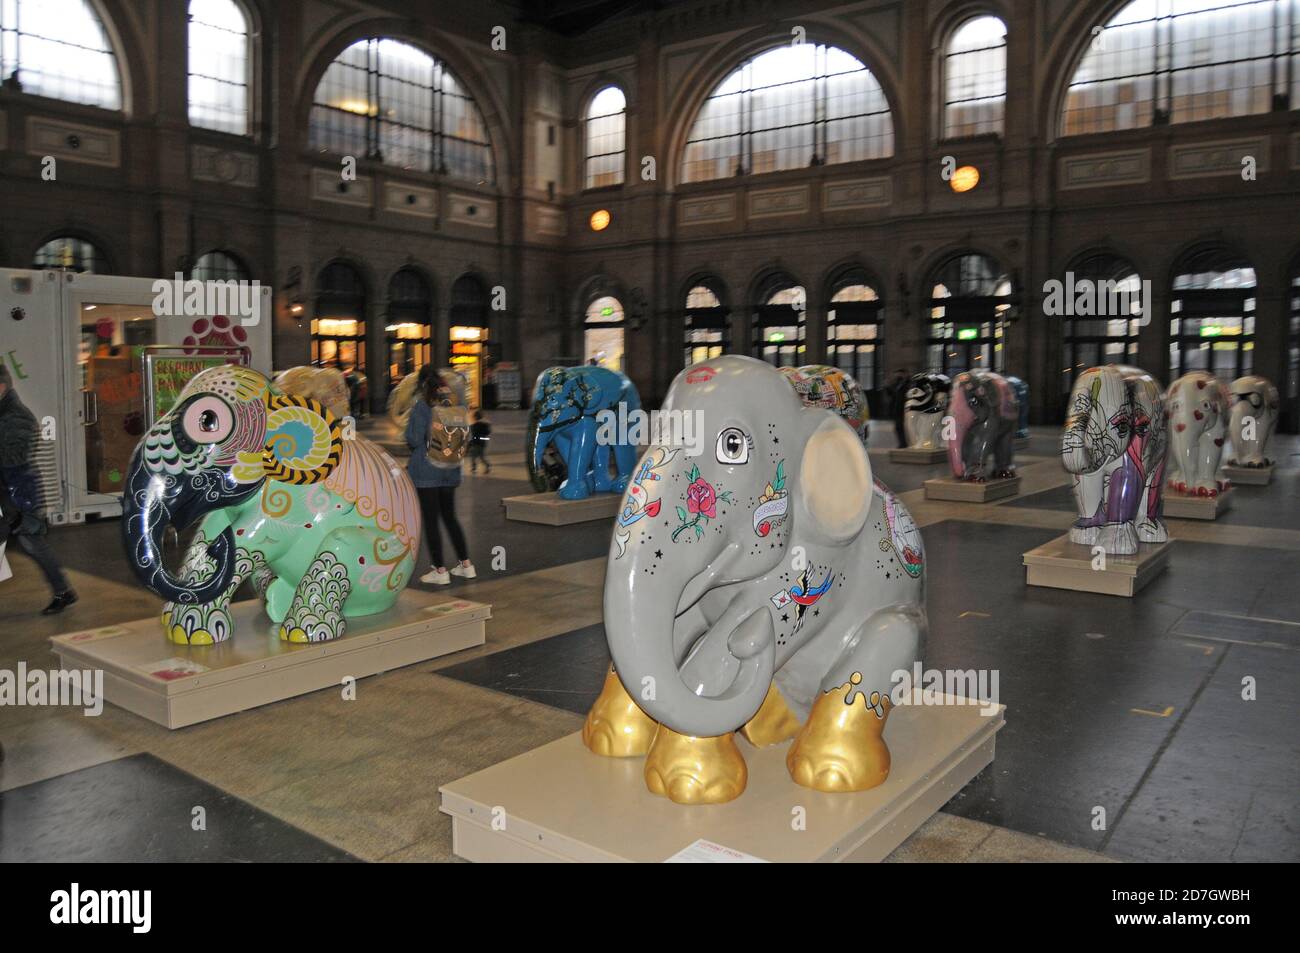 The «Elephant Parade Swiss Tour 2020» has been initiated by Claudia & Franco Knie from the Swiss National Circus and shown in London, Amsterdam, Calai Stock Photo